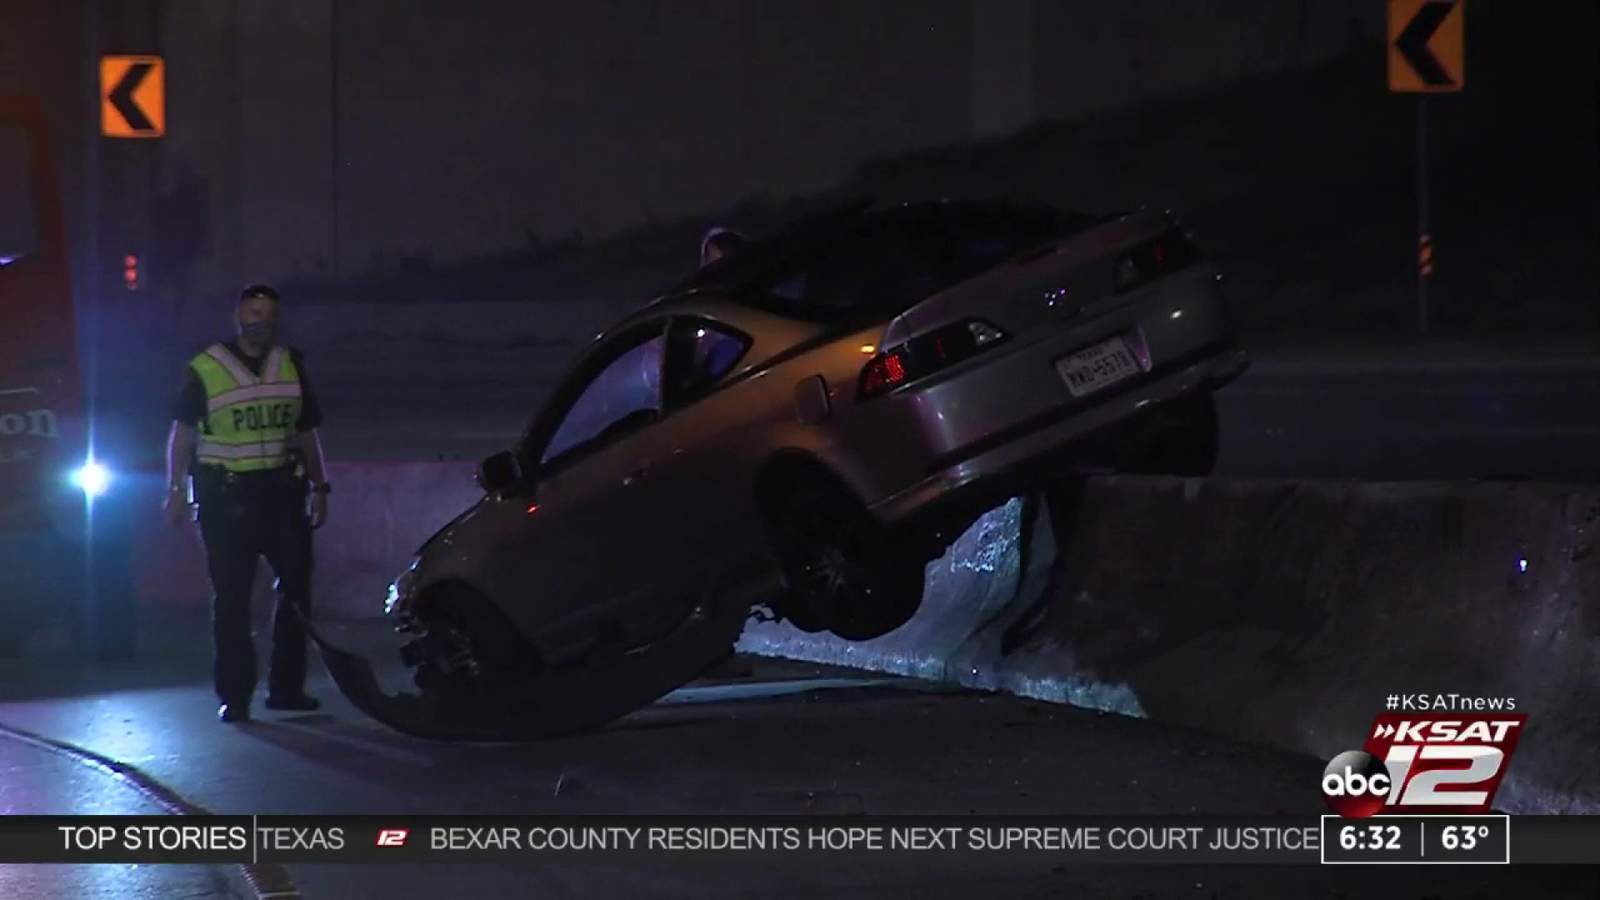 Suspect in apparent DWI rollover on North Side still at large, police say